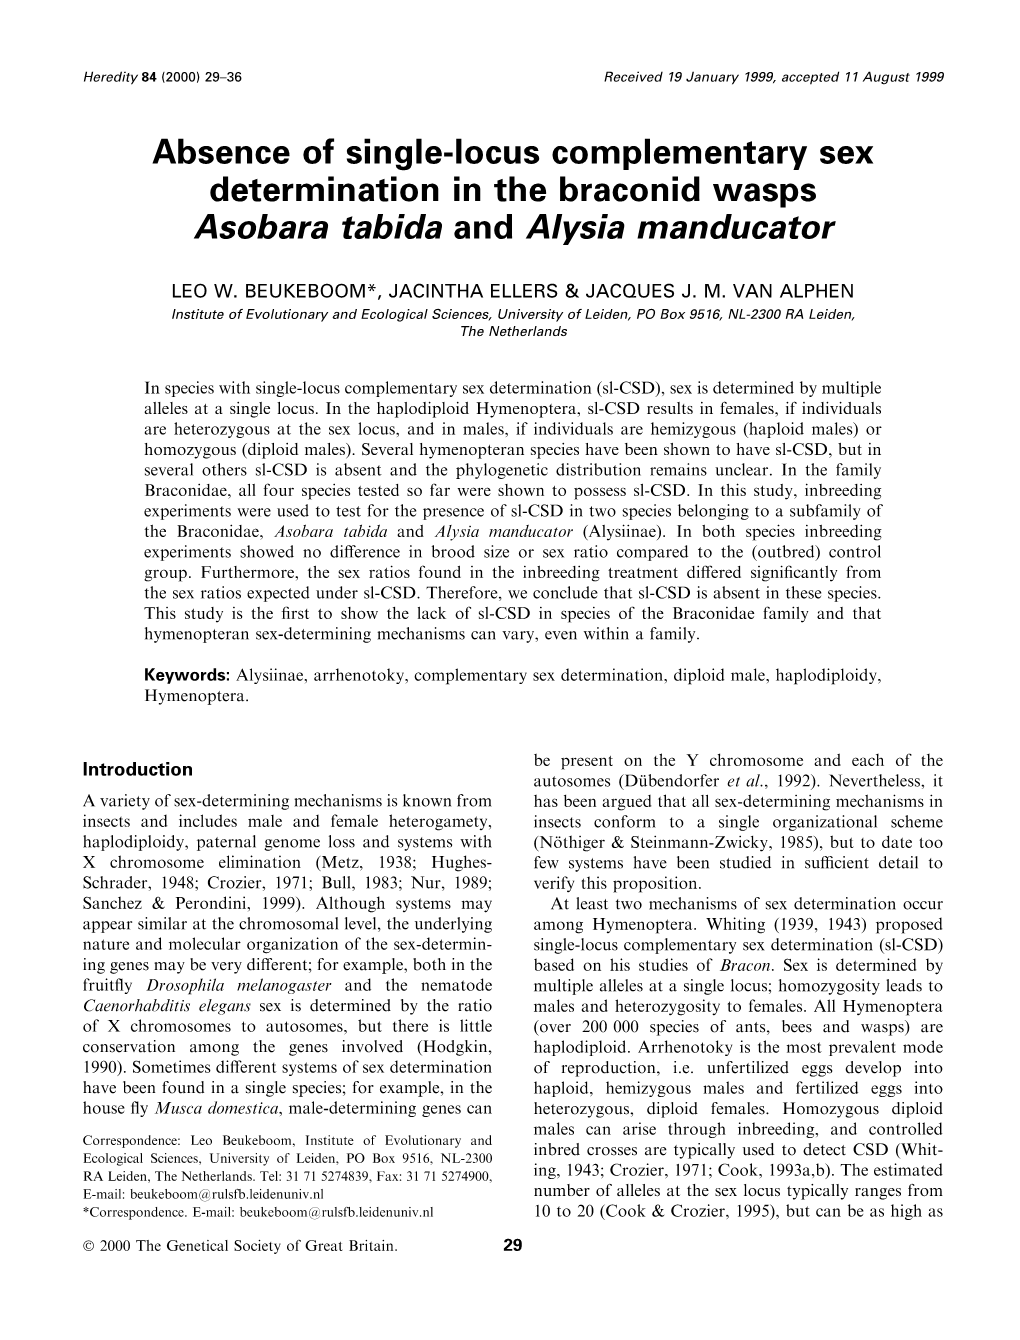 Absence of Single-Locus Complementary Sex Determination in the Braconid Wasps Asobara Tabida and Alysia Manducator